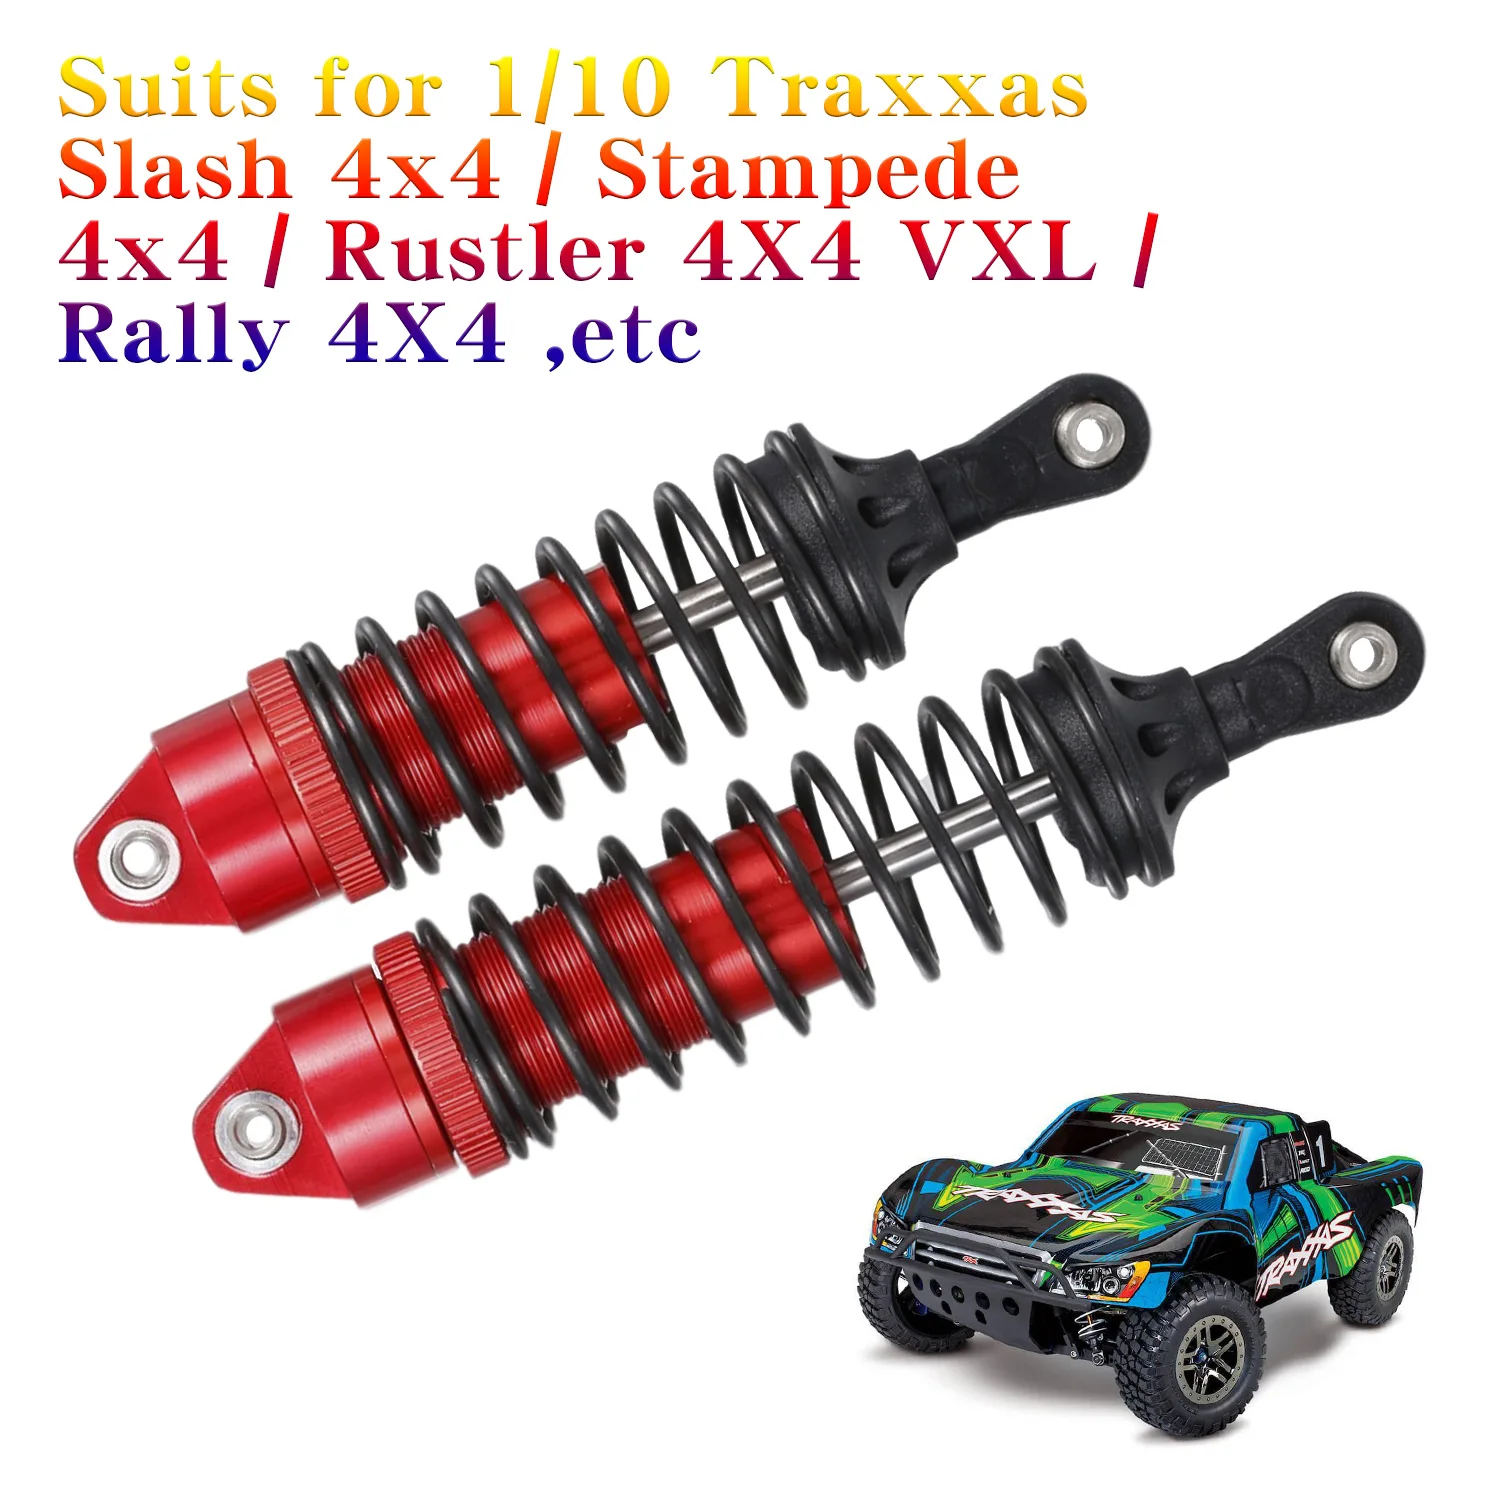 Stampede Rustler HobbyPark Aluminum Front & Rear Shock Absorber Assembled Full Metal for RC 1/10 Traxxas Slash Replacement of Parts 5862 3760 3762 Nitro Slash Red 